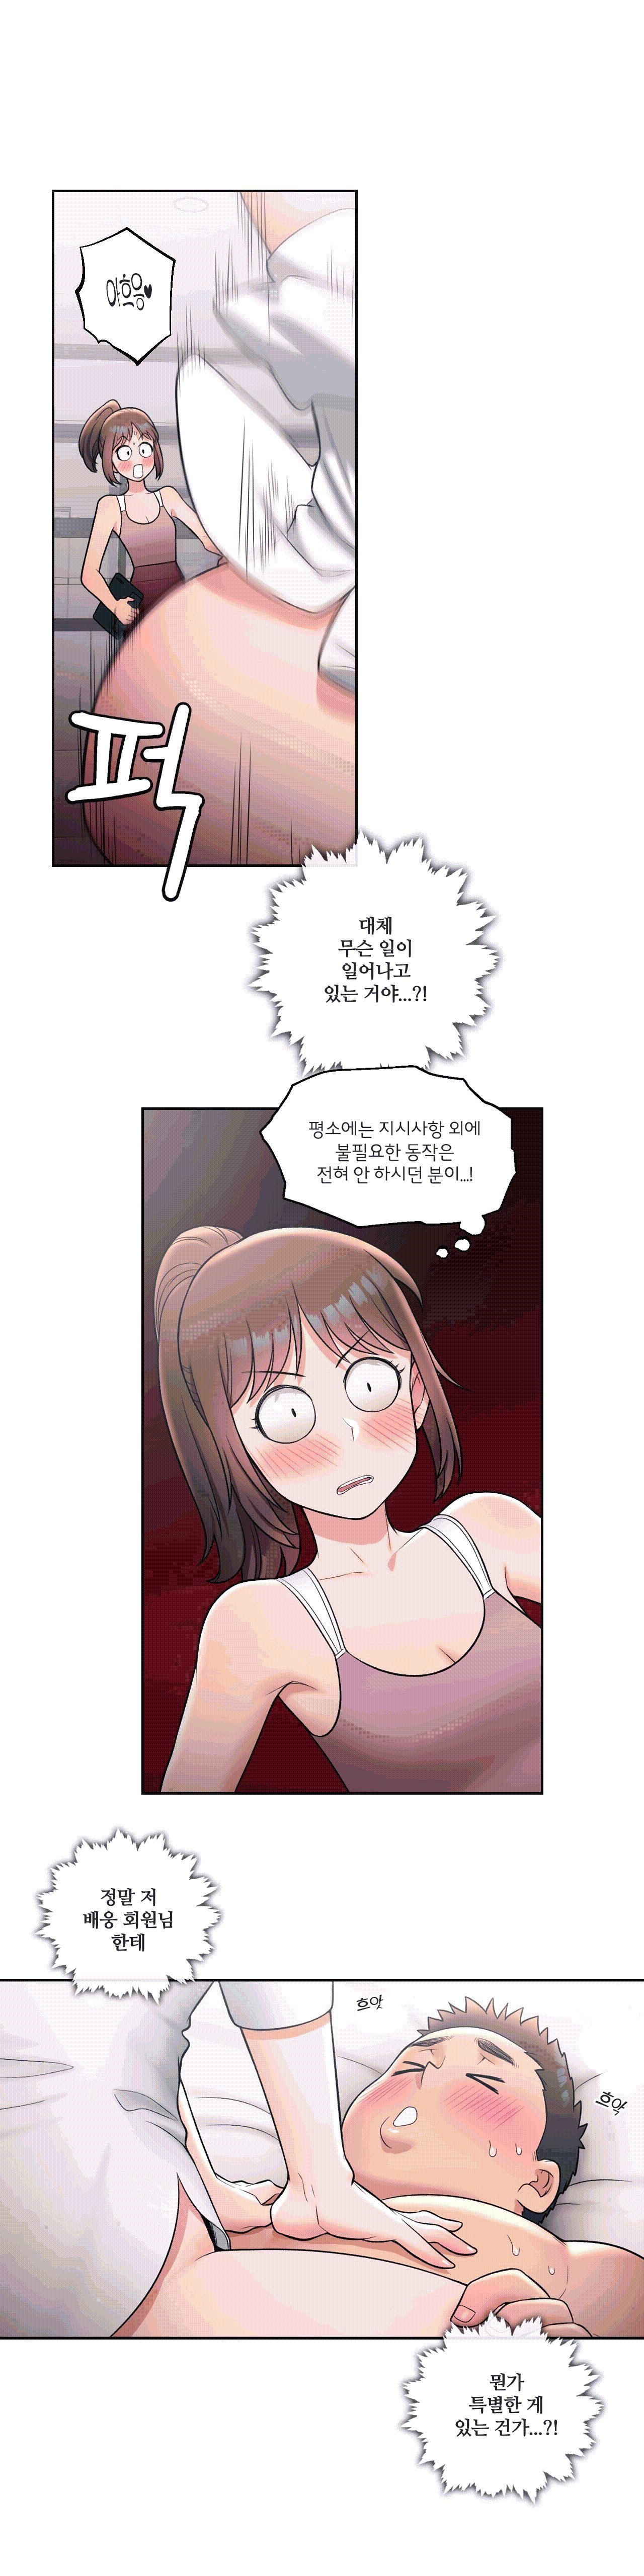 Sexercise Raw - Chapter 29 Page 5